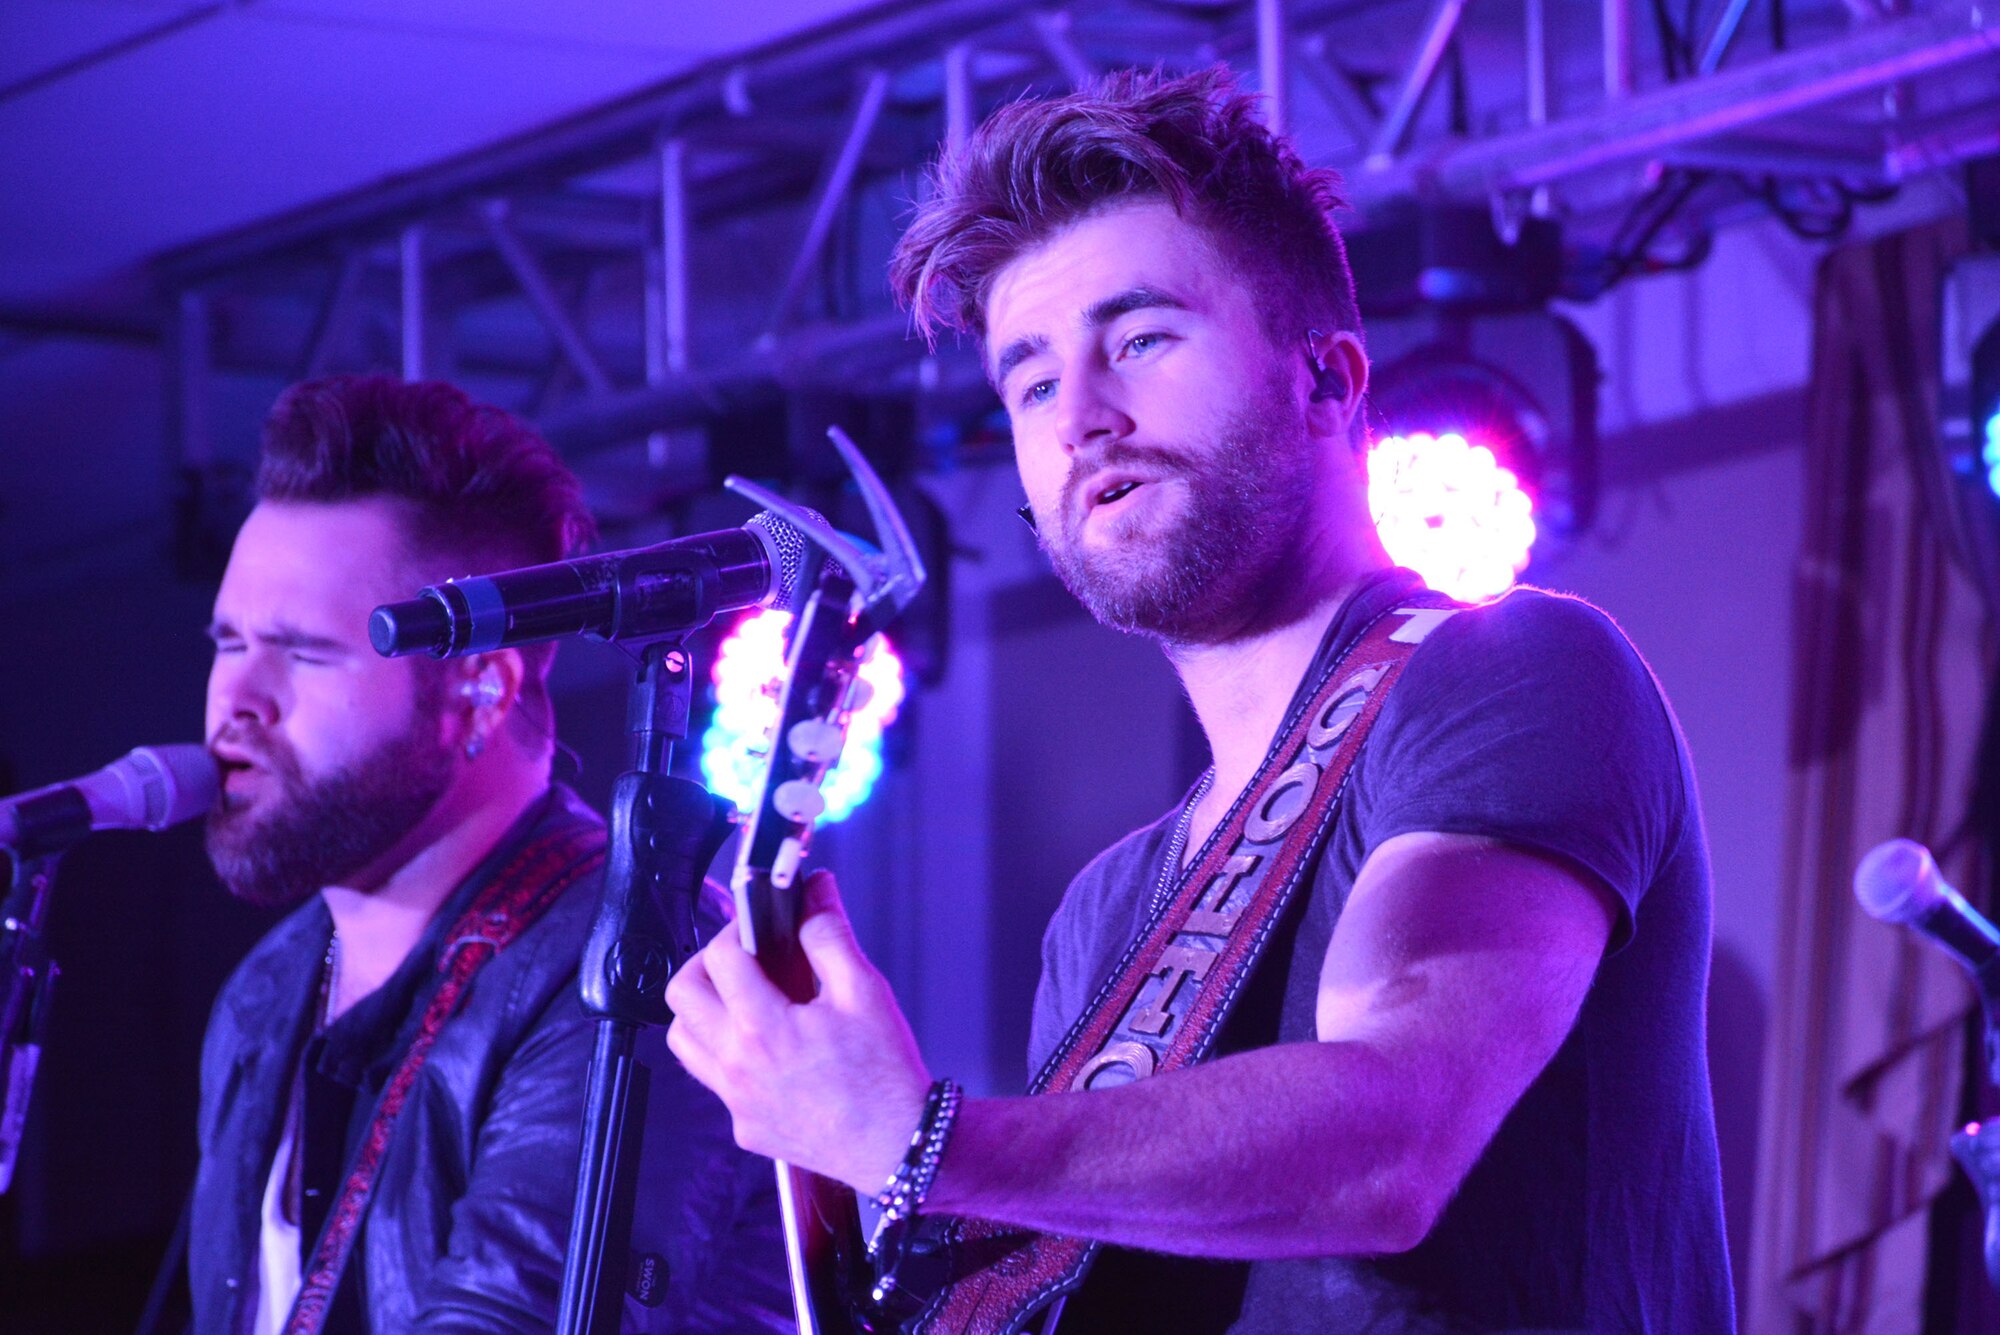 The Swon Brothers, Colton, right, and Zach, perform for an appreciative crowd Oct. 7 at the Tinker Club as part of a USO tour that made a stop at Tinker Air Force Base. The Swon Brothers and their crew also toured an E-3 “Sentry” Airborne Warning and Control System aircraft earlier in the day. In 2013, the American country music duo from Muskogee finished in third place on the fourth season of NBC’s “The Voice,” making them the first duo to make it from the Top 12 live shows to the season finale. (Air Force photo by Darren D. Heusel/Released)